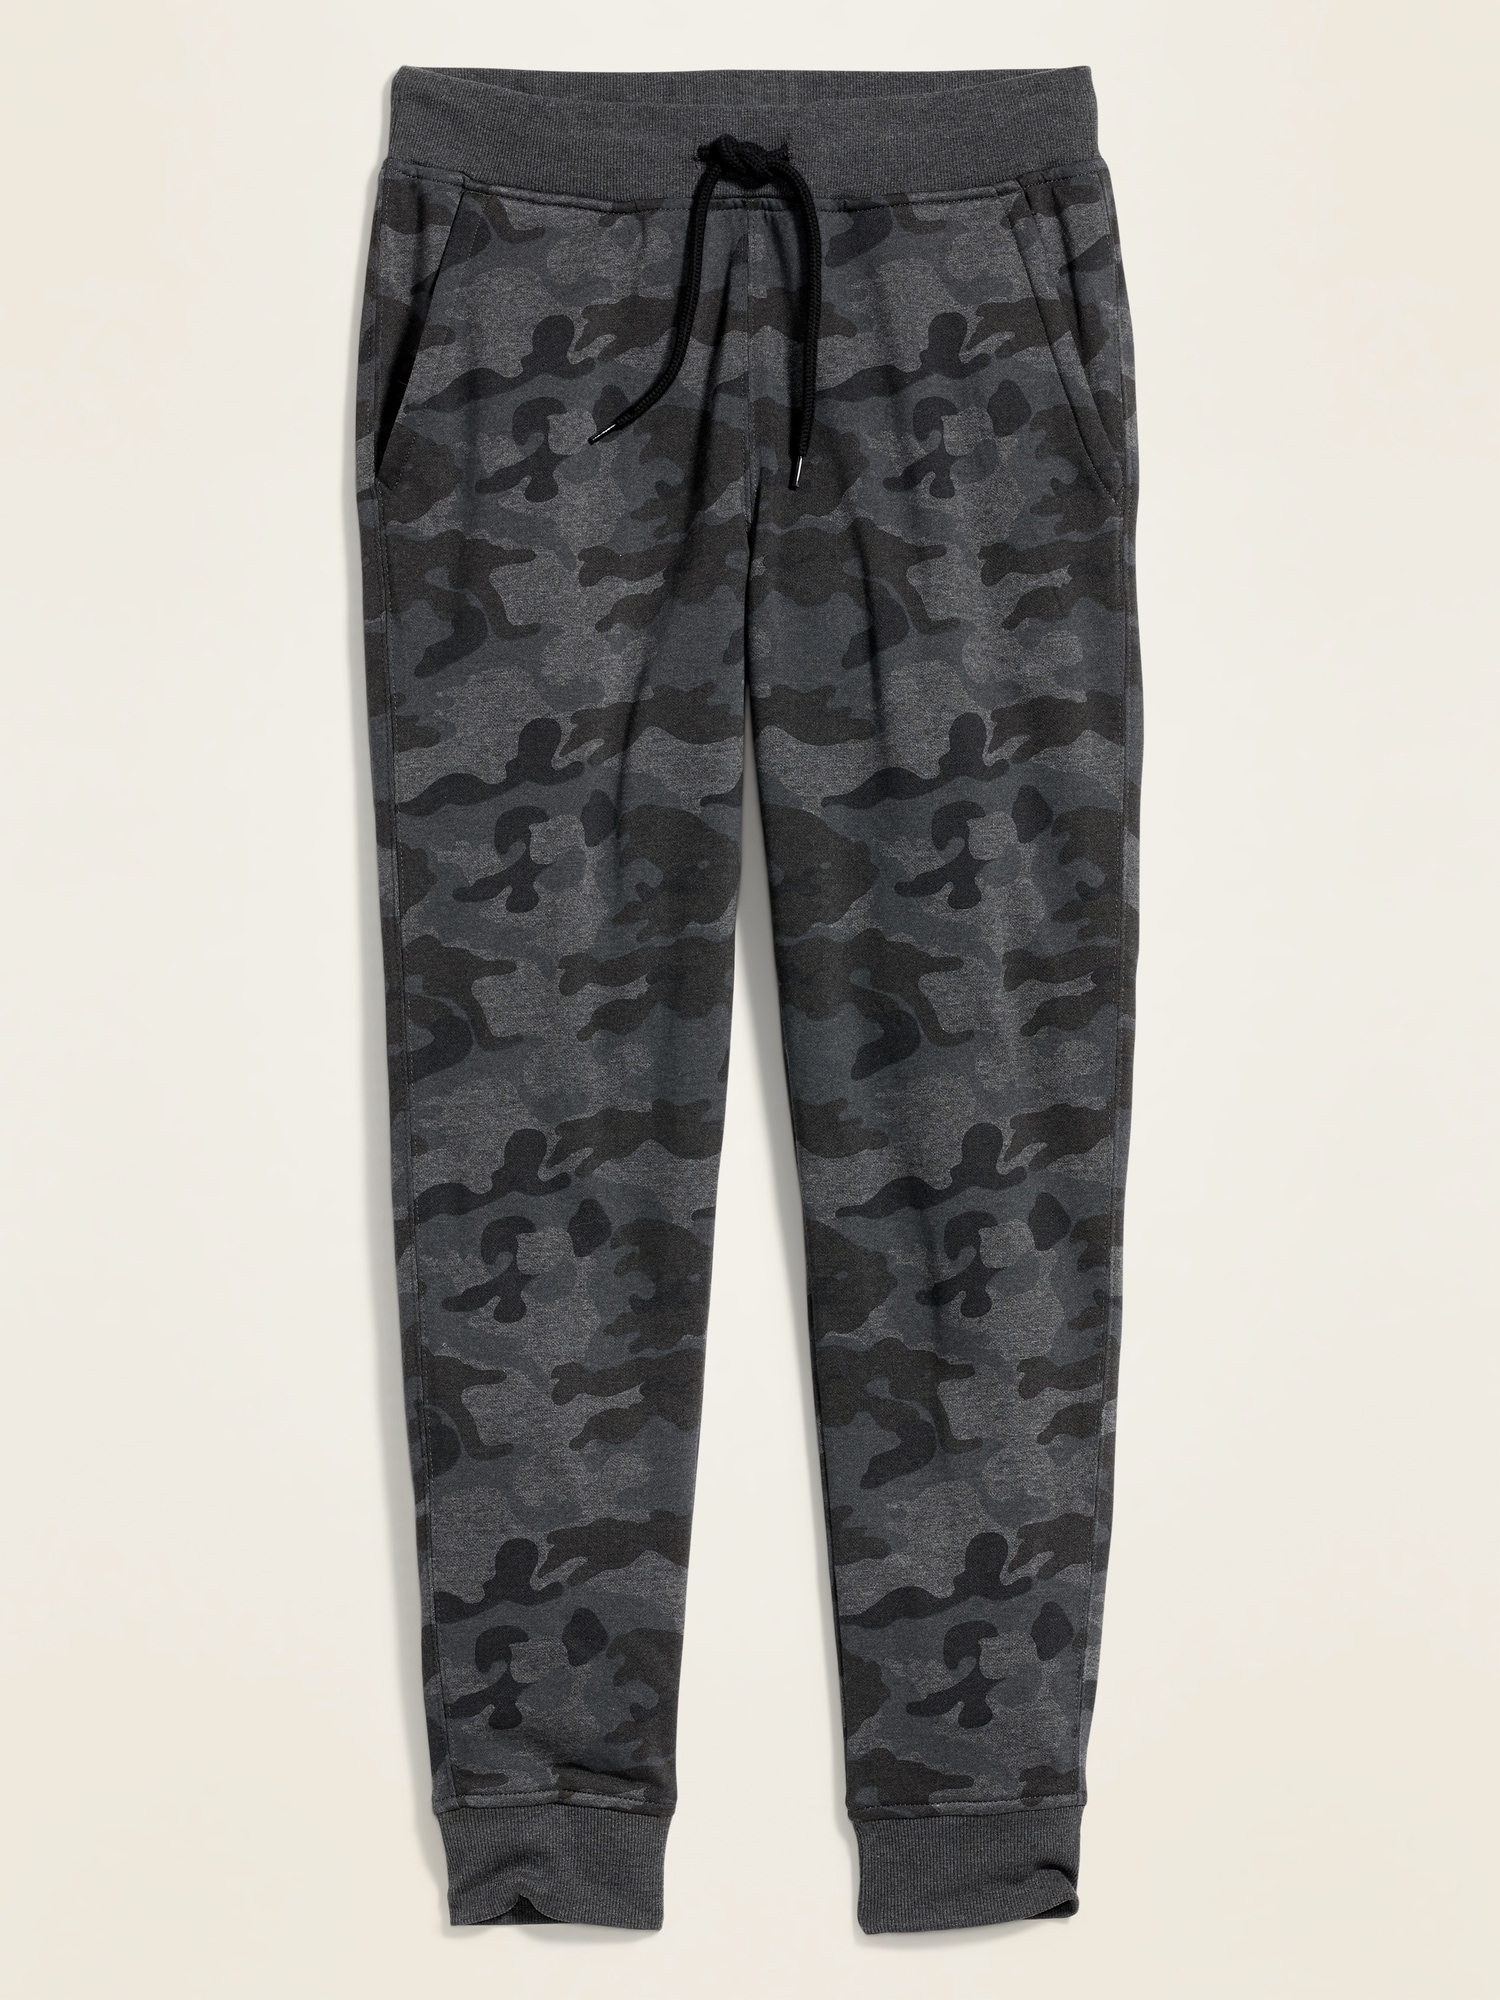 men's old navy camouflage pants